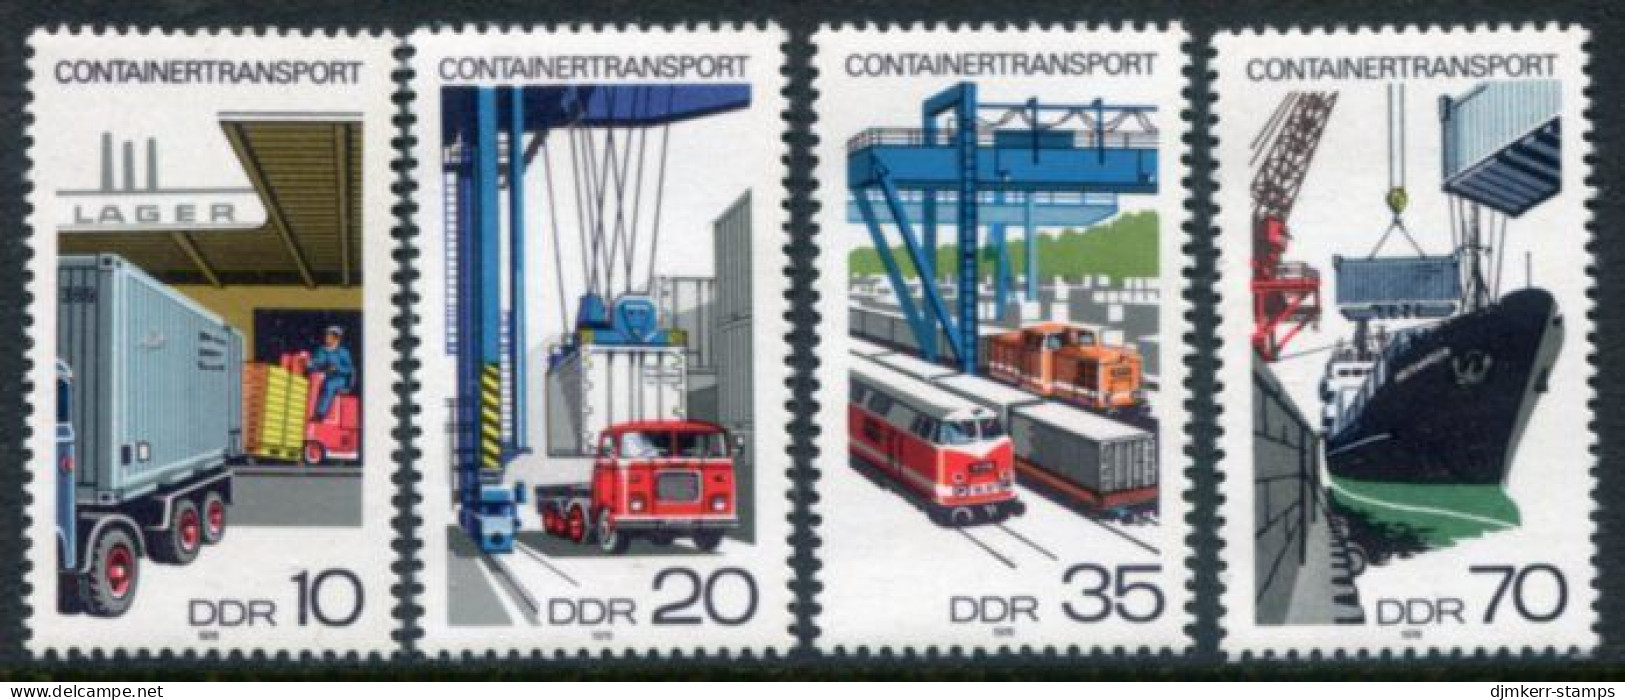 DDR / E. GERMANY 1978 Container Transport MNH / **  Michel 2326-29 - Ongebruikt